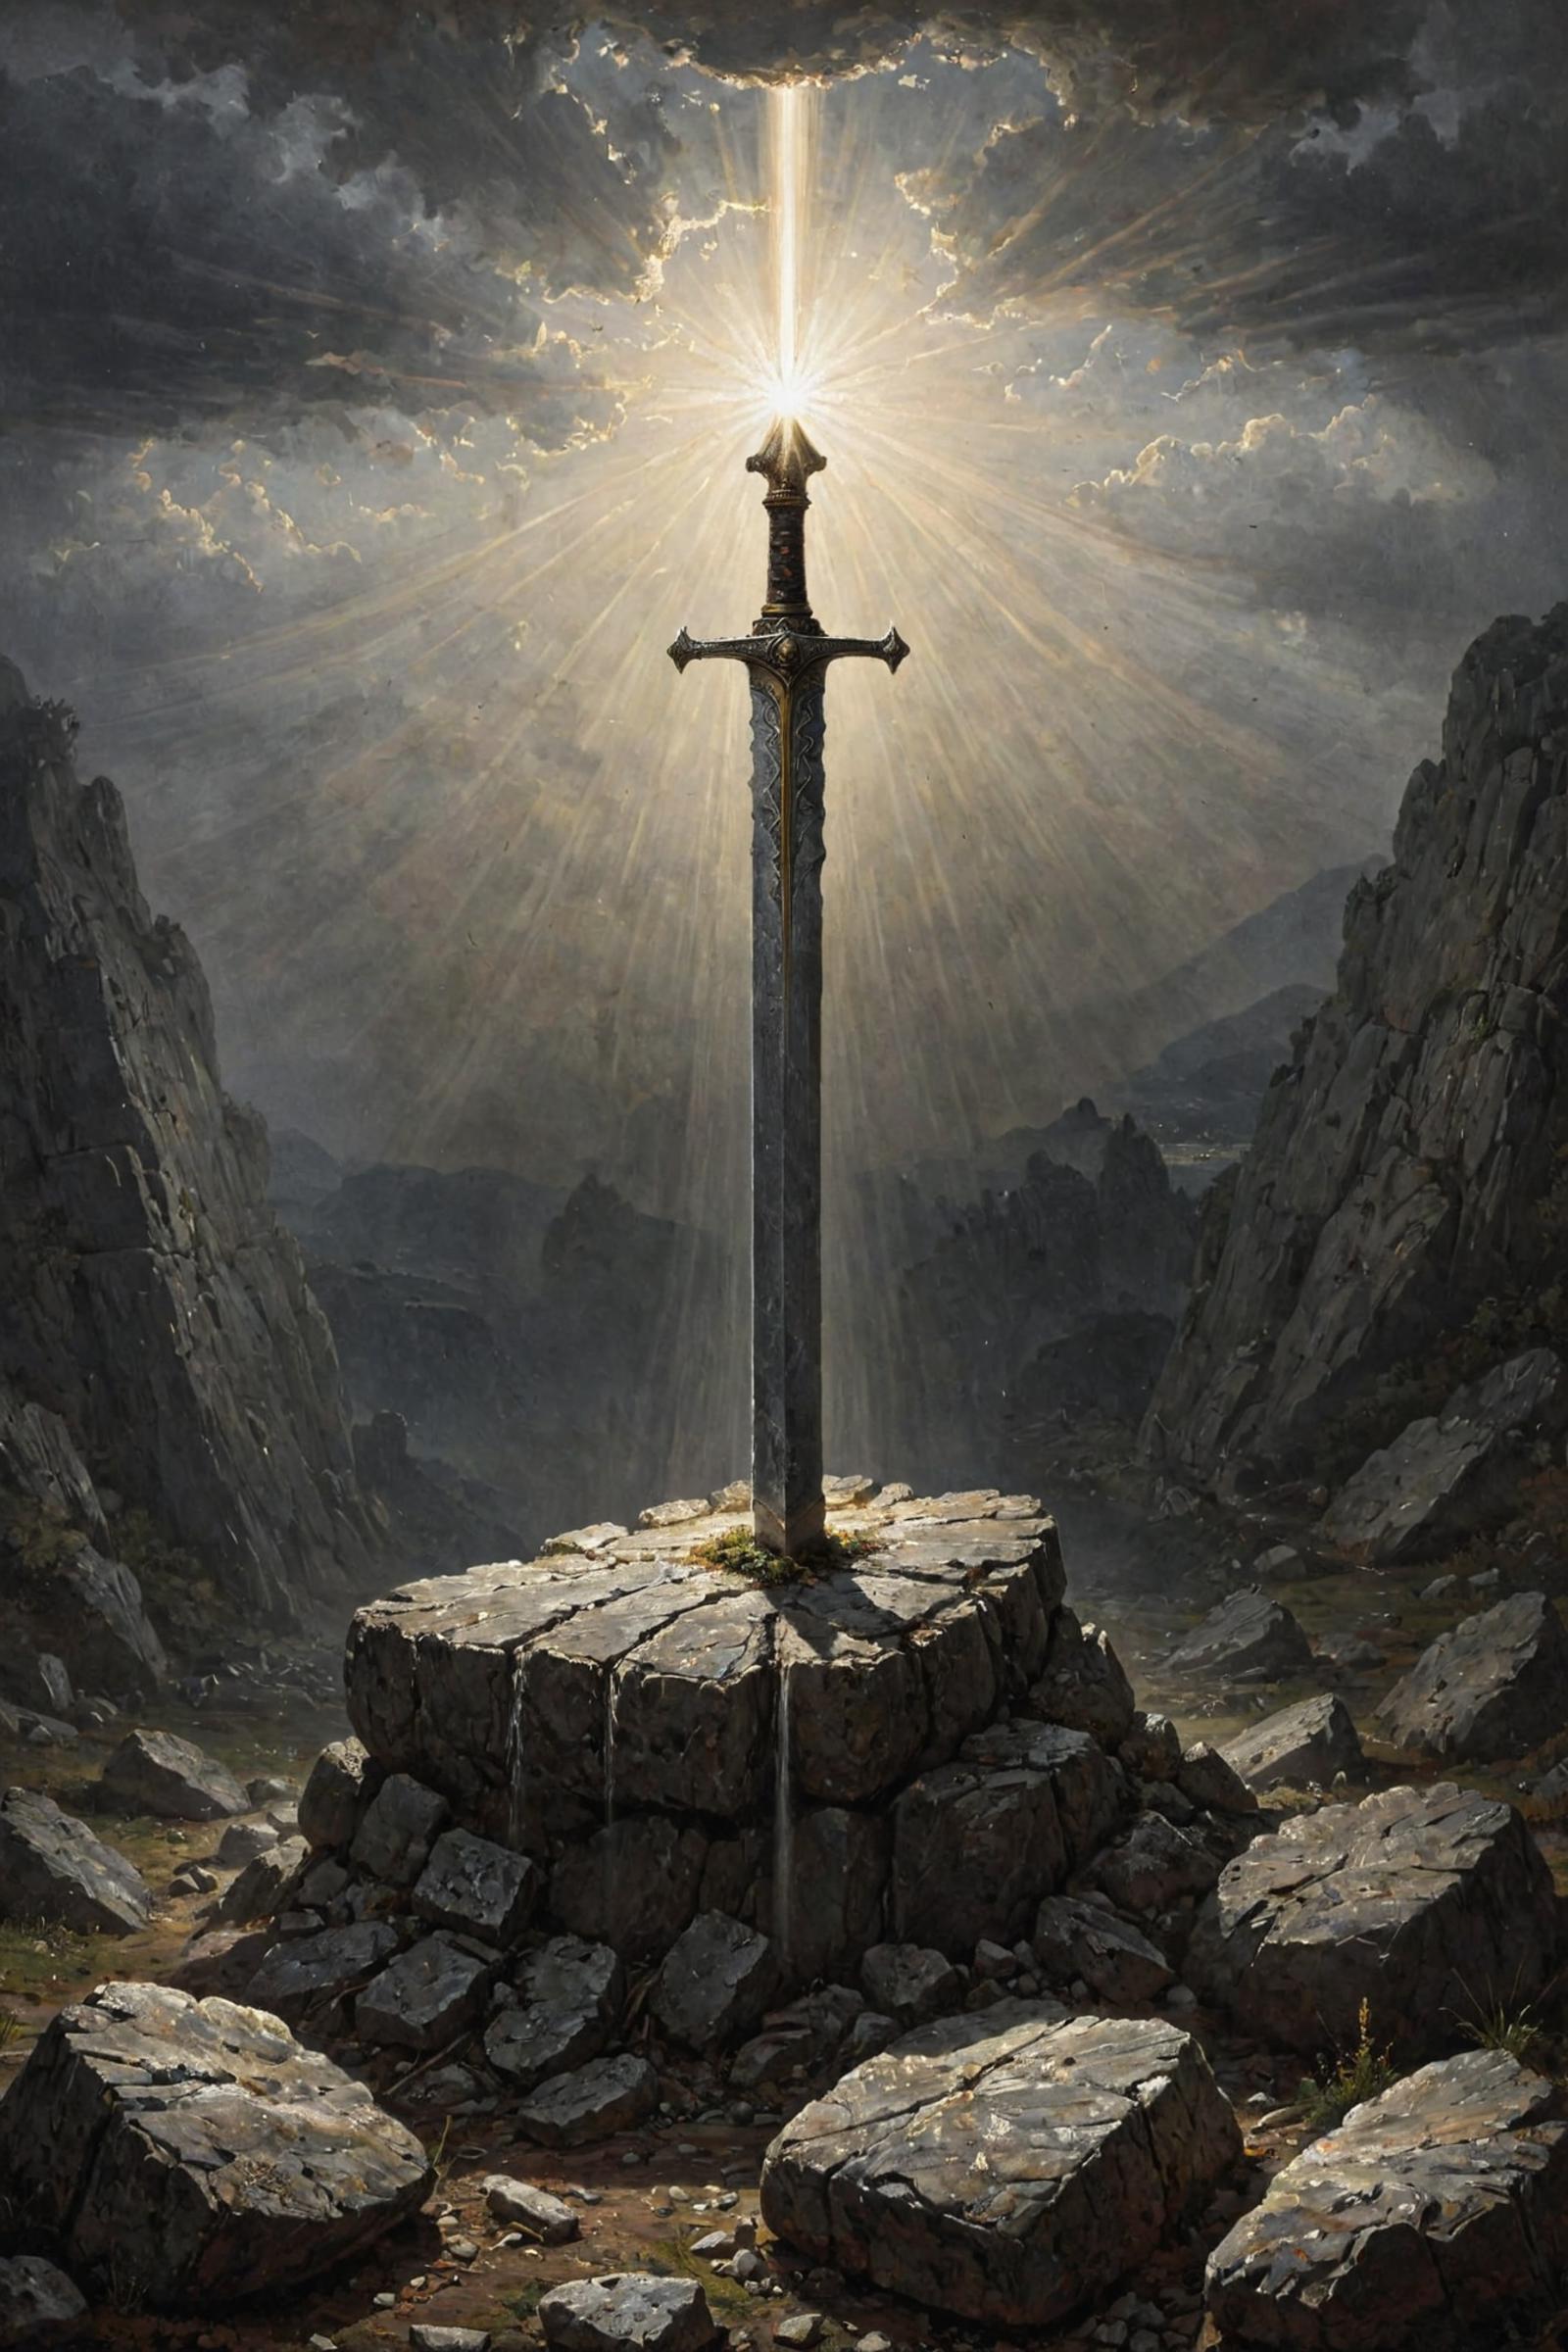 Ancient sword on top of a stone pedestal in a rocky mountain landscape.